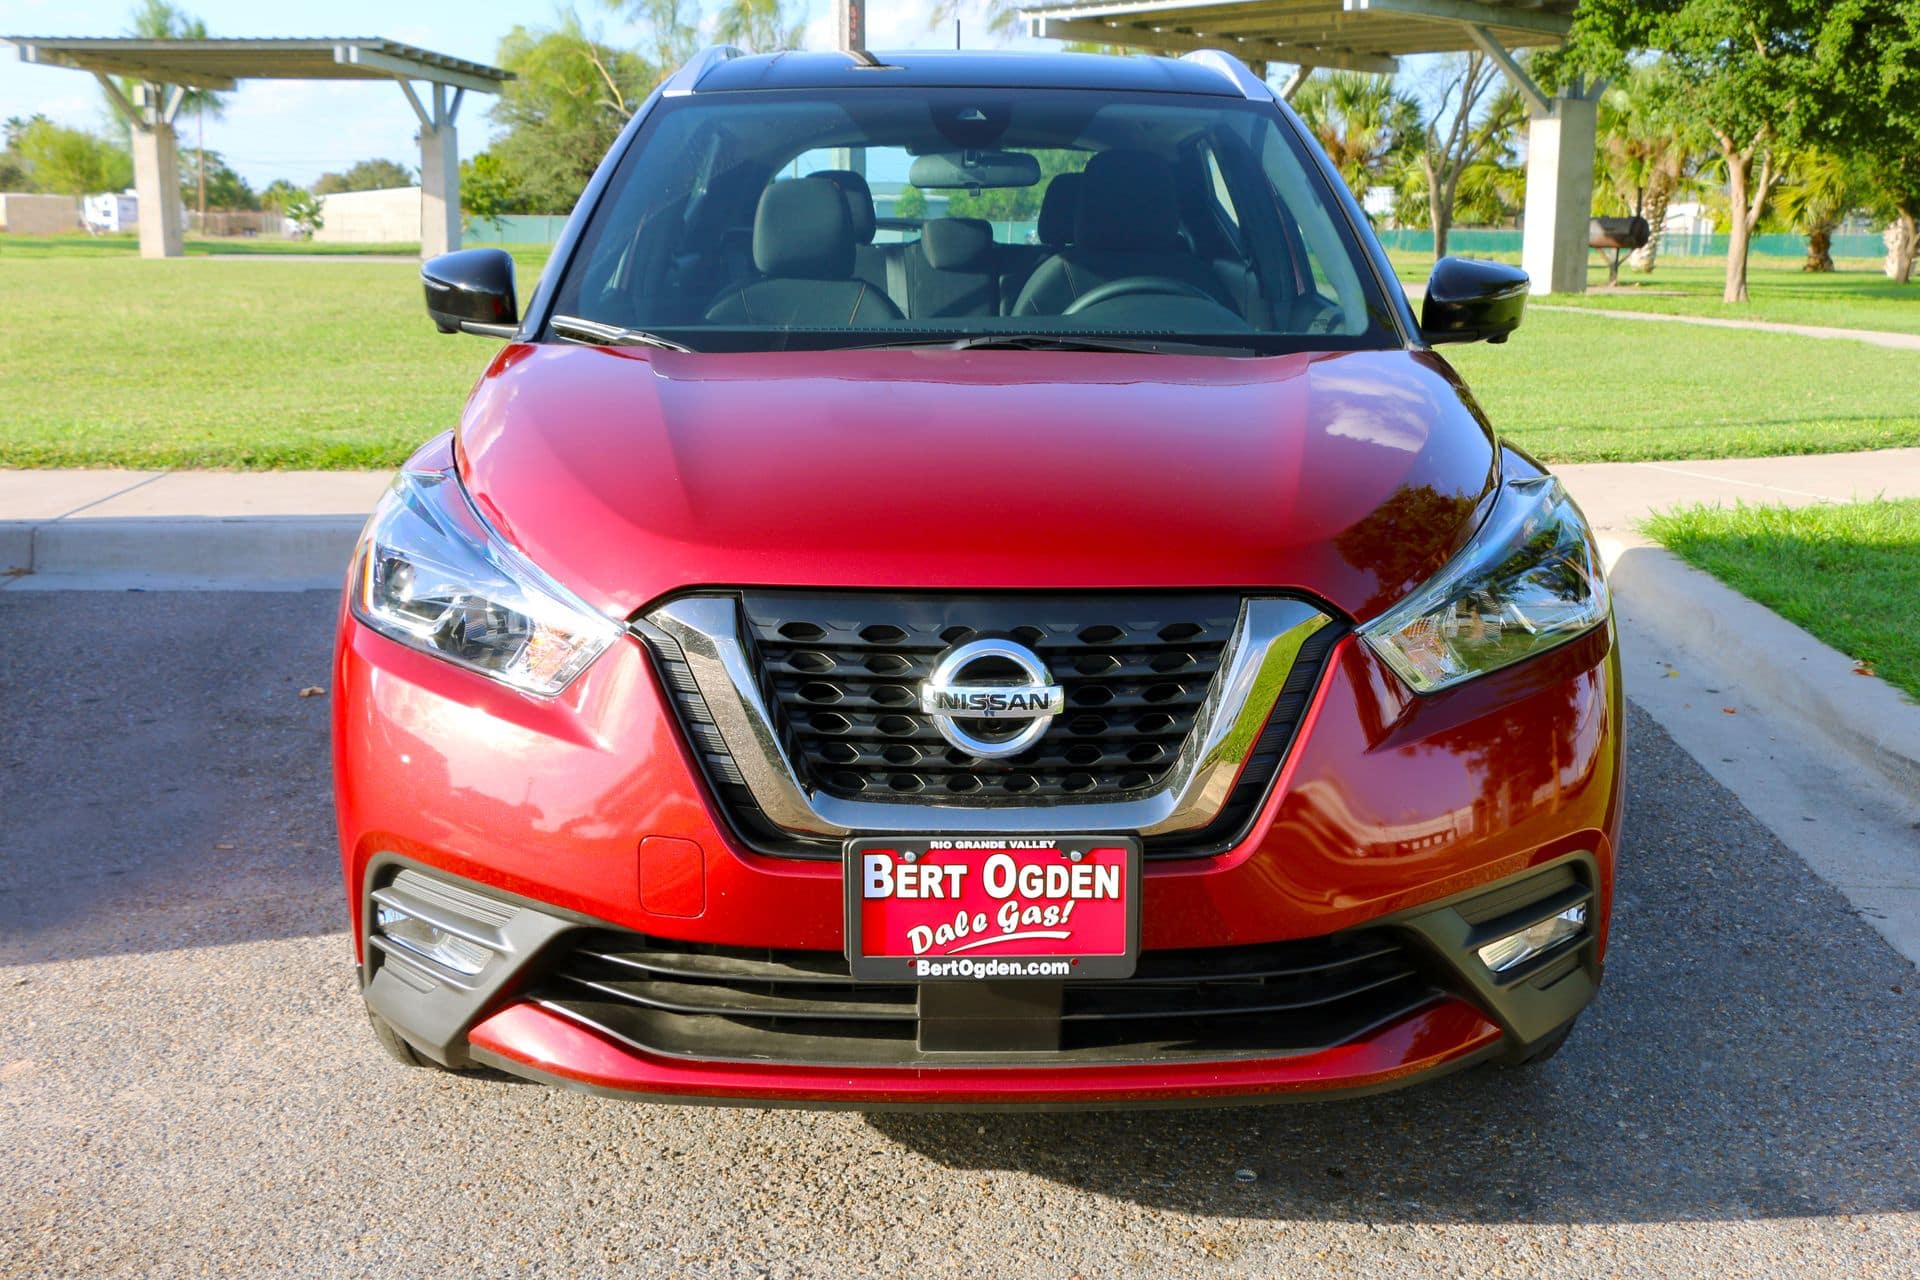 Red Nissan front view